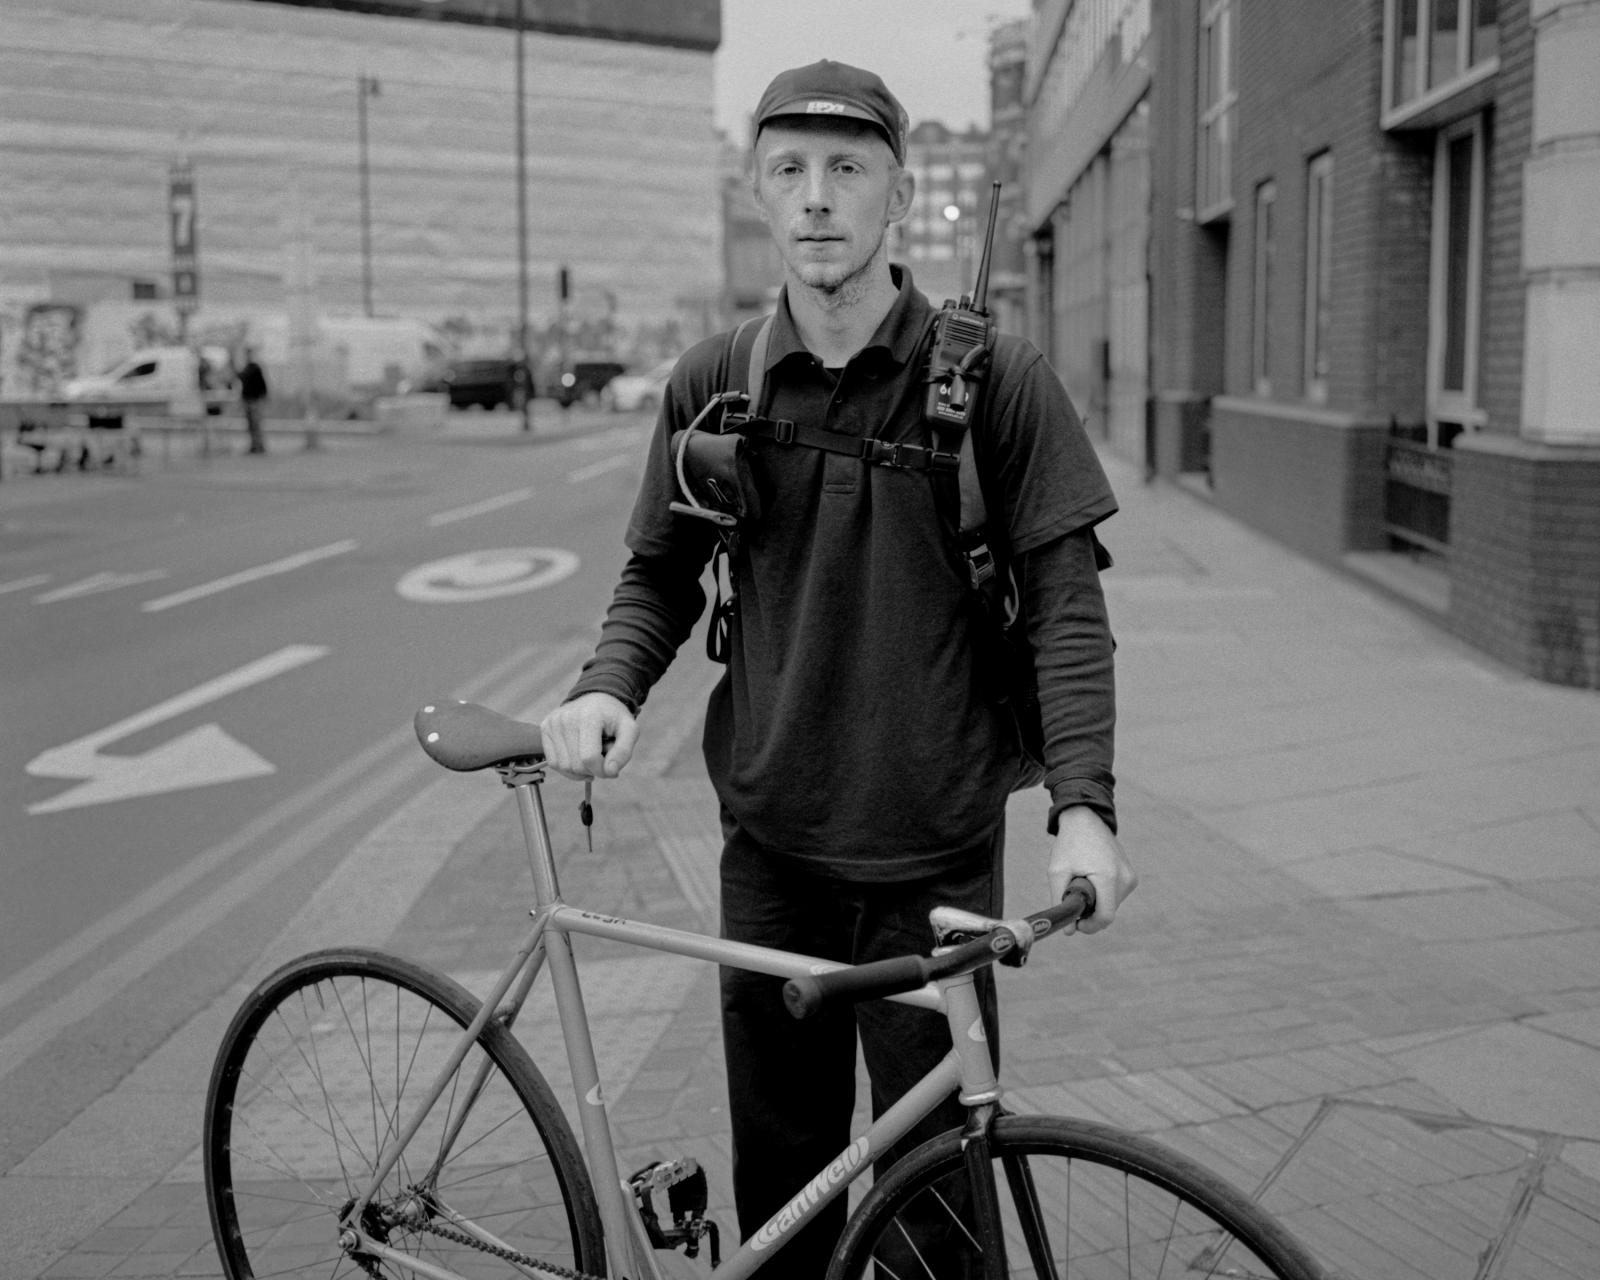 The Circuit. London Bicycle Messengers 2009-2015 - Nic, Shoreditch, 2015